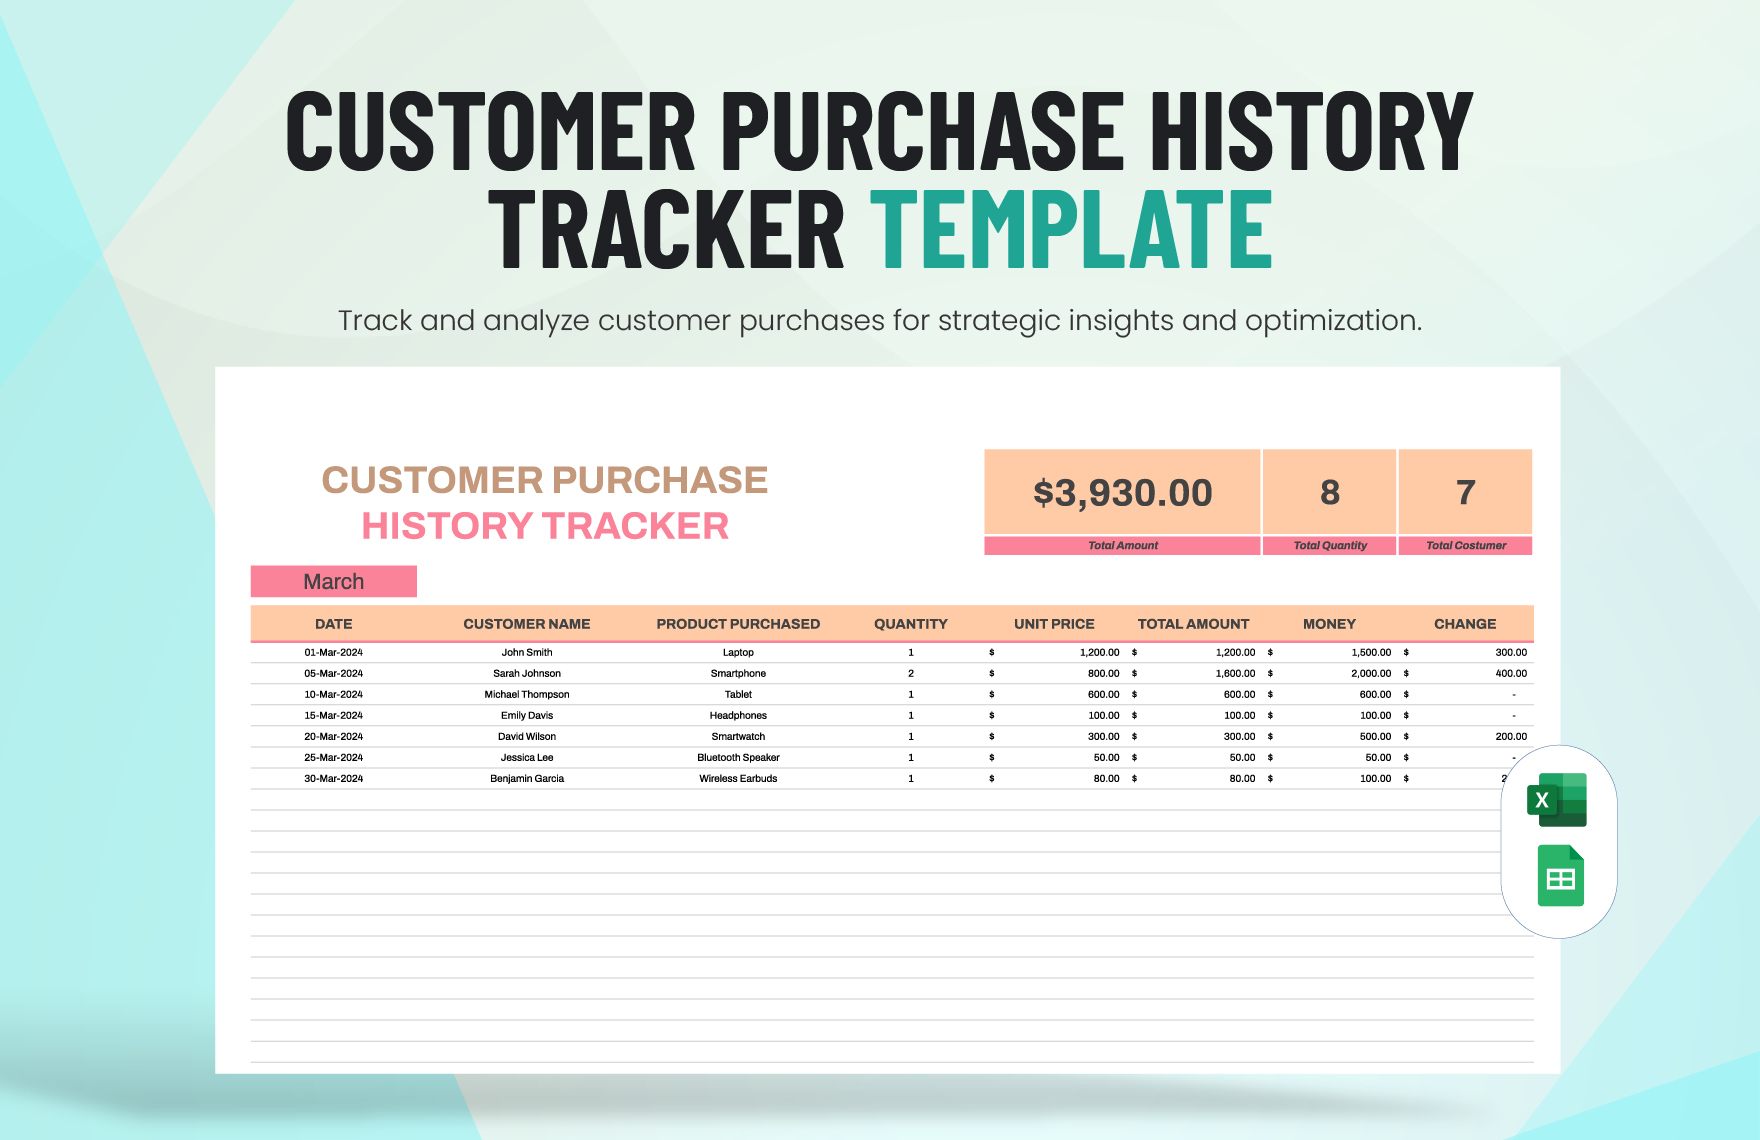 Customer Purchase History Tracker Template in Excel, Google Sheets